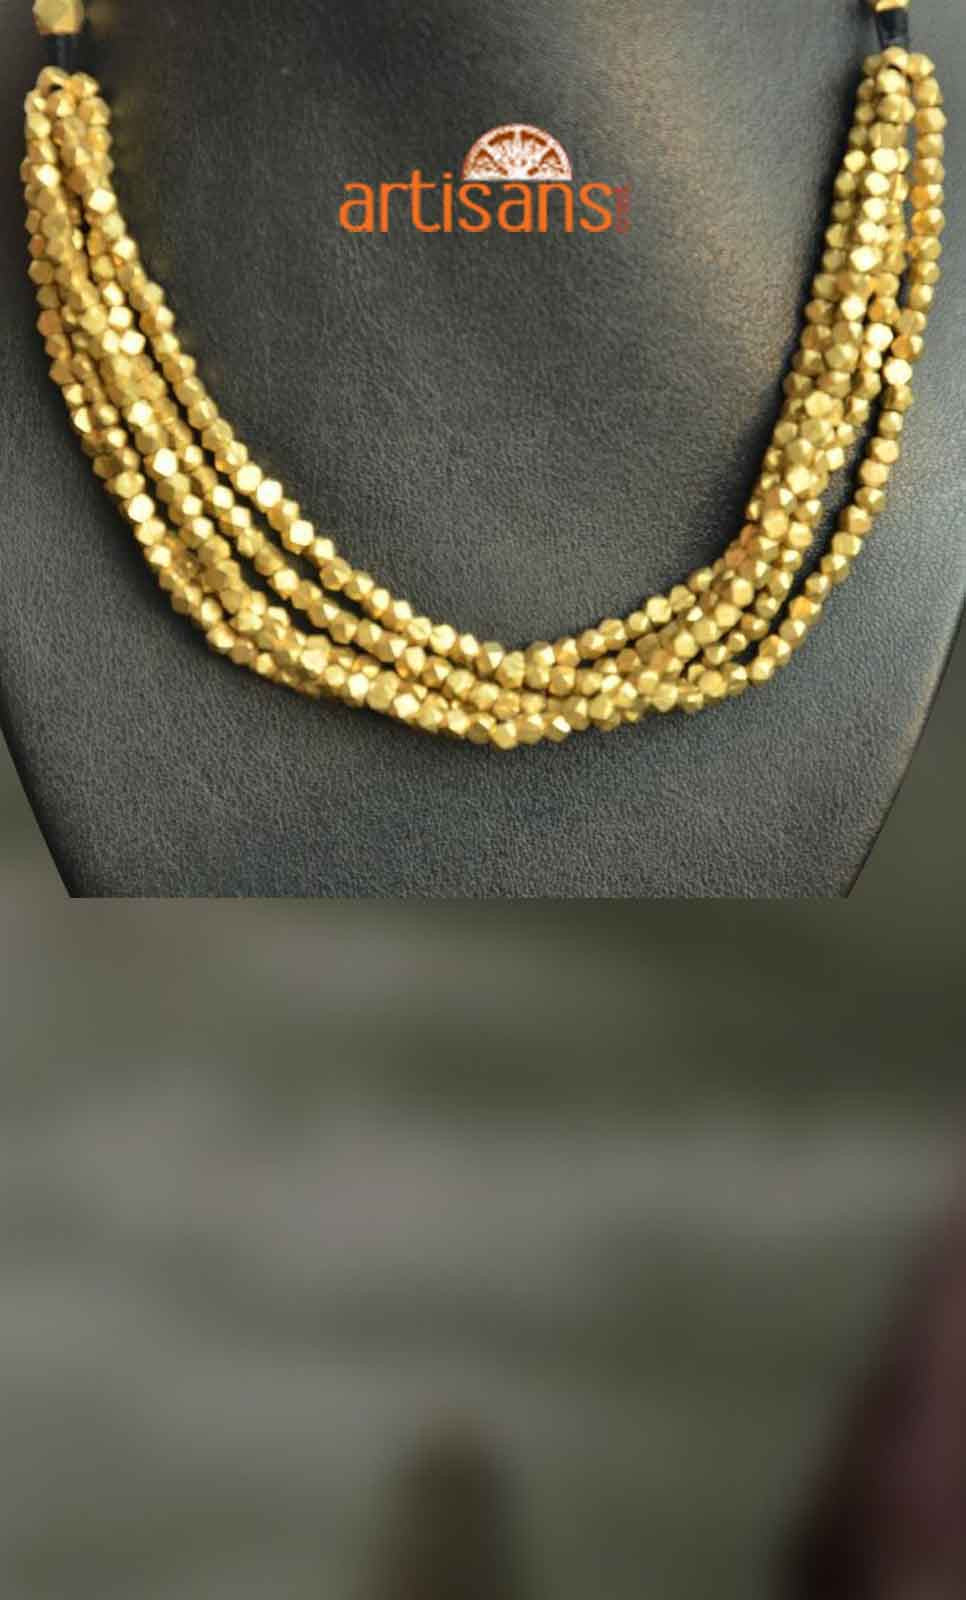 13 Grams Beads Necklace - Indian Jewellery Designs